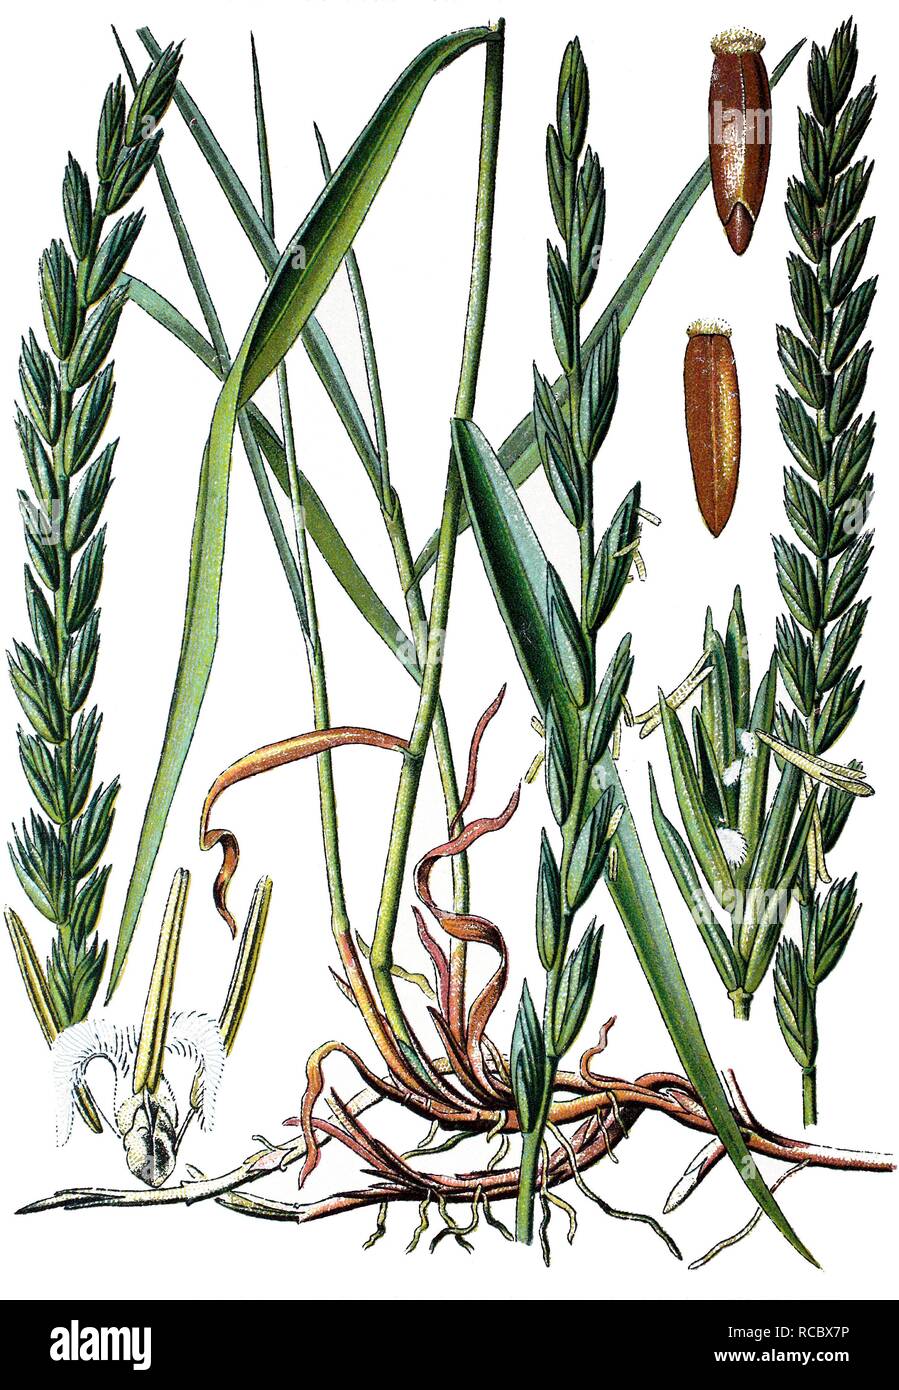 Couch grass (Triticum repens), medicinal plant, historical chromolithography, 1870 Stock Photo